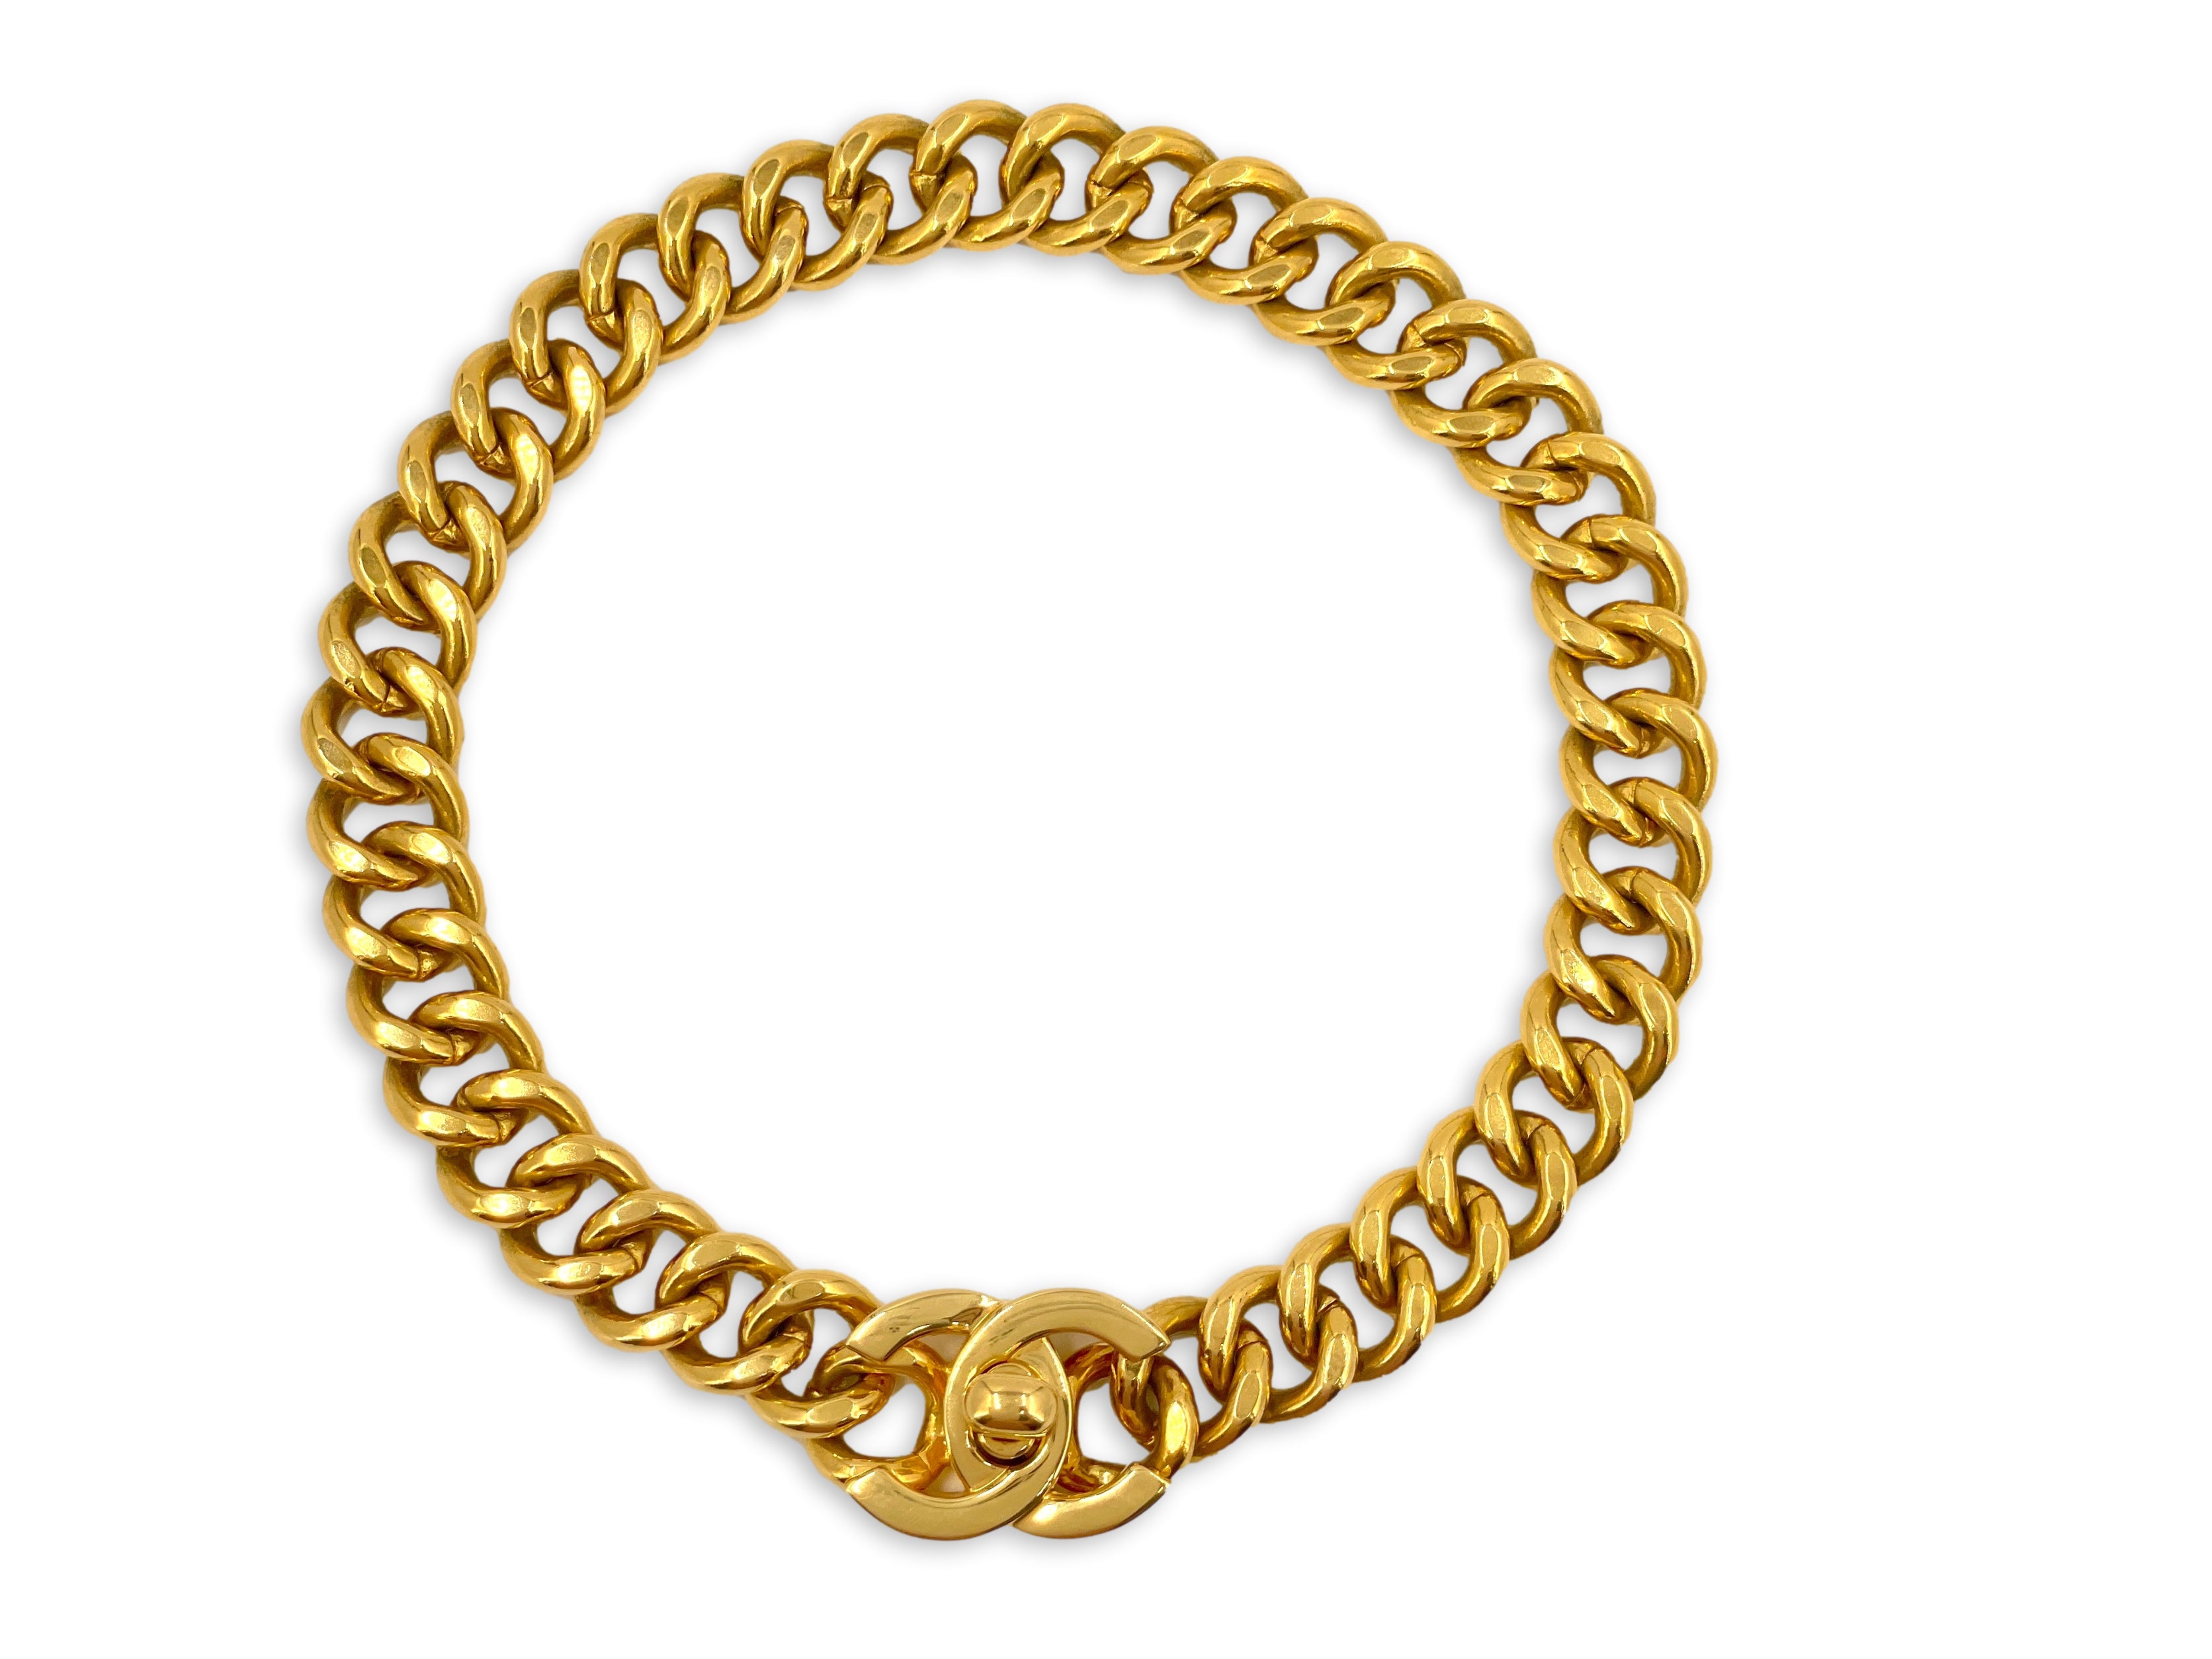 Chanel Vintage Silver Metal Chain Turnlock CC Choker Necklace, 1996  Available For Immediate Sale At Sotheby's